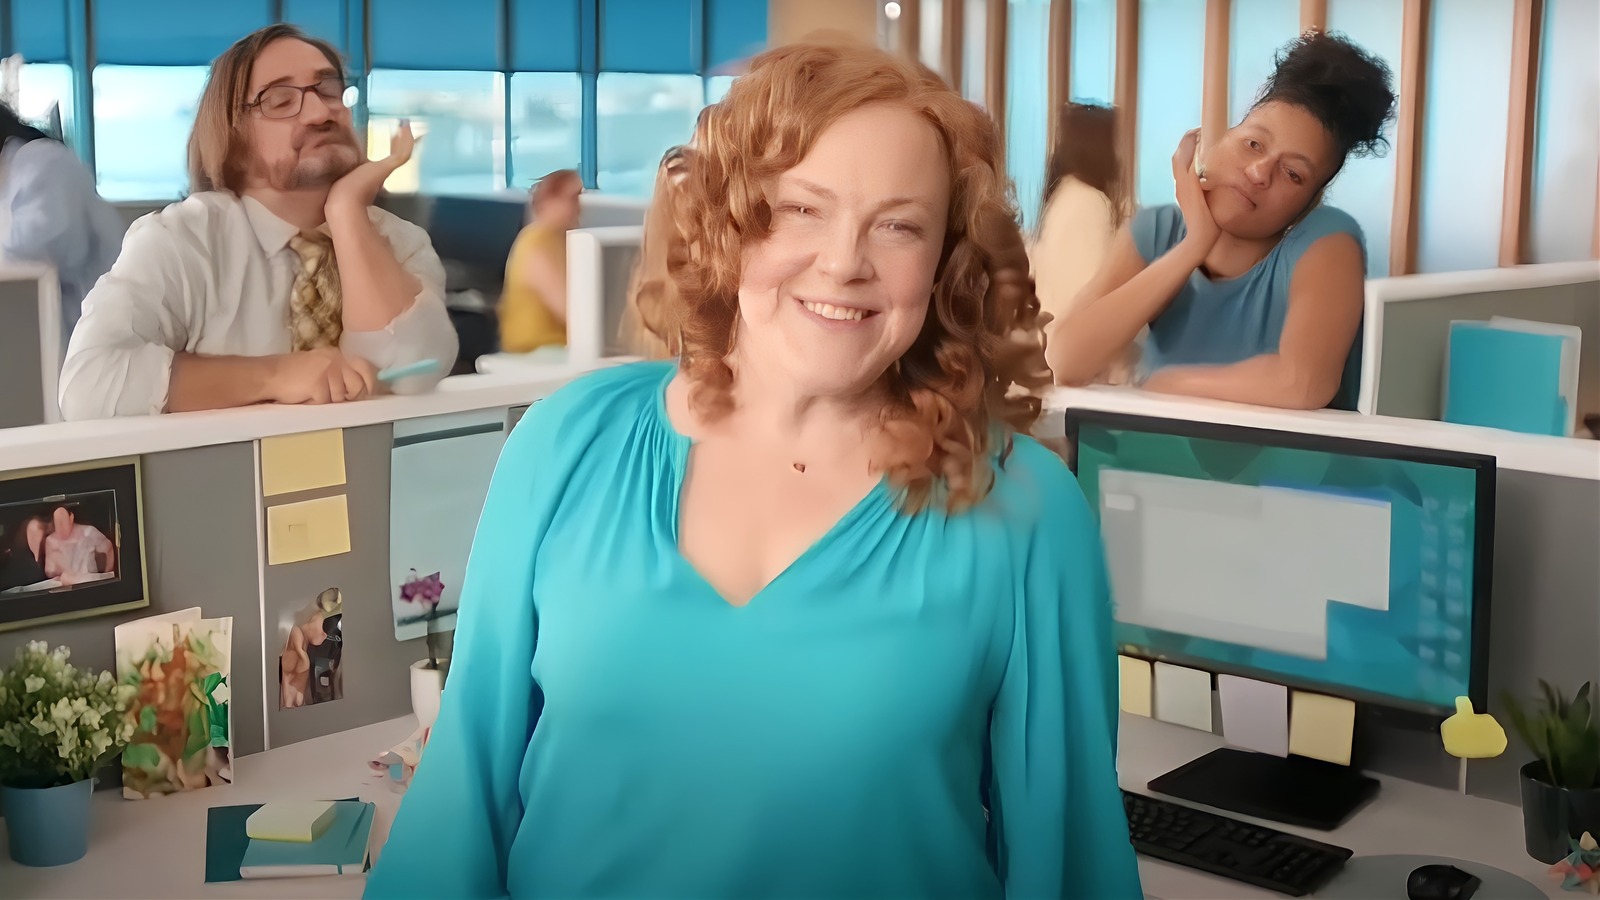 The New Jardiance Commercial Lady Has The Internet Divided (Again)